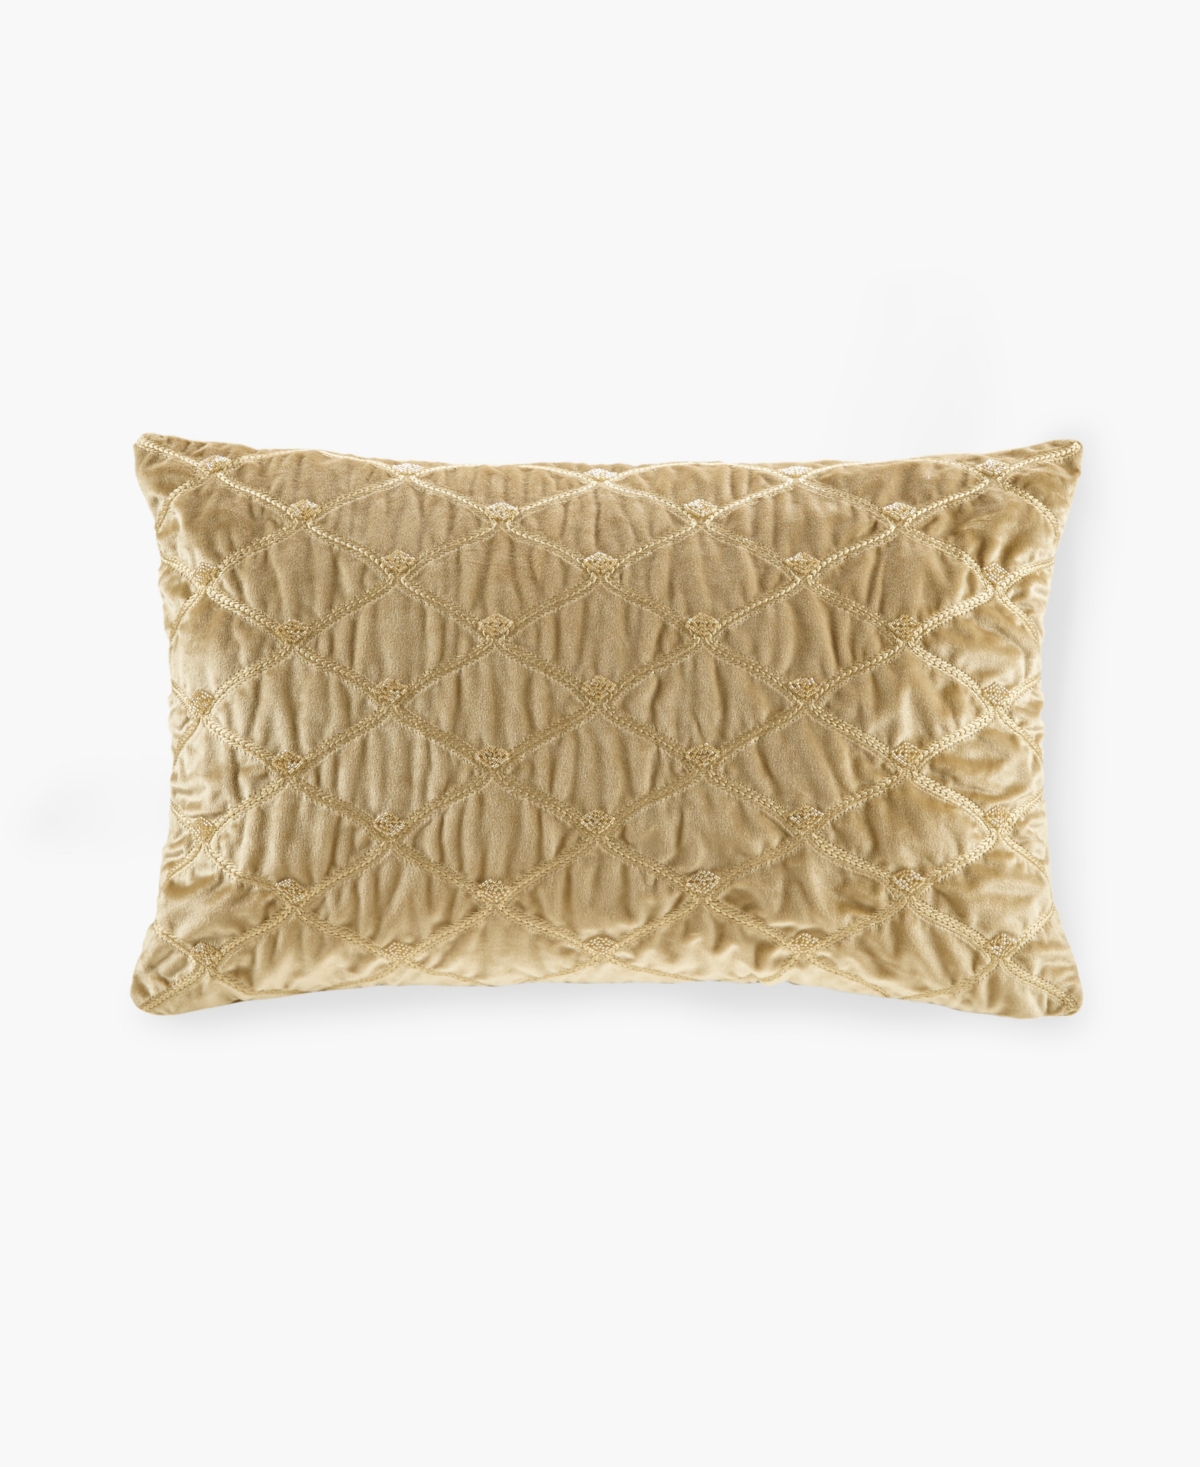 Croscill Aumont Oblong Decorative Pillow, 22" X 15" In Gold